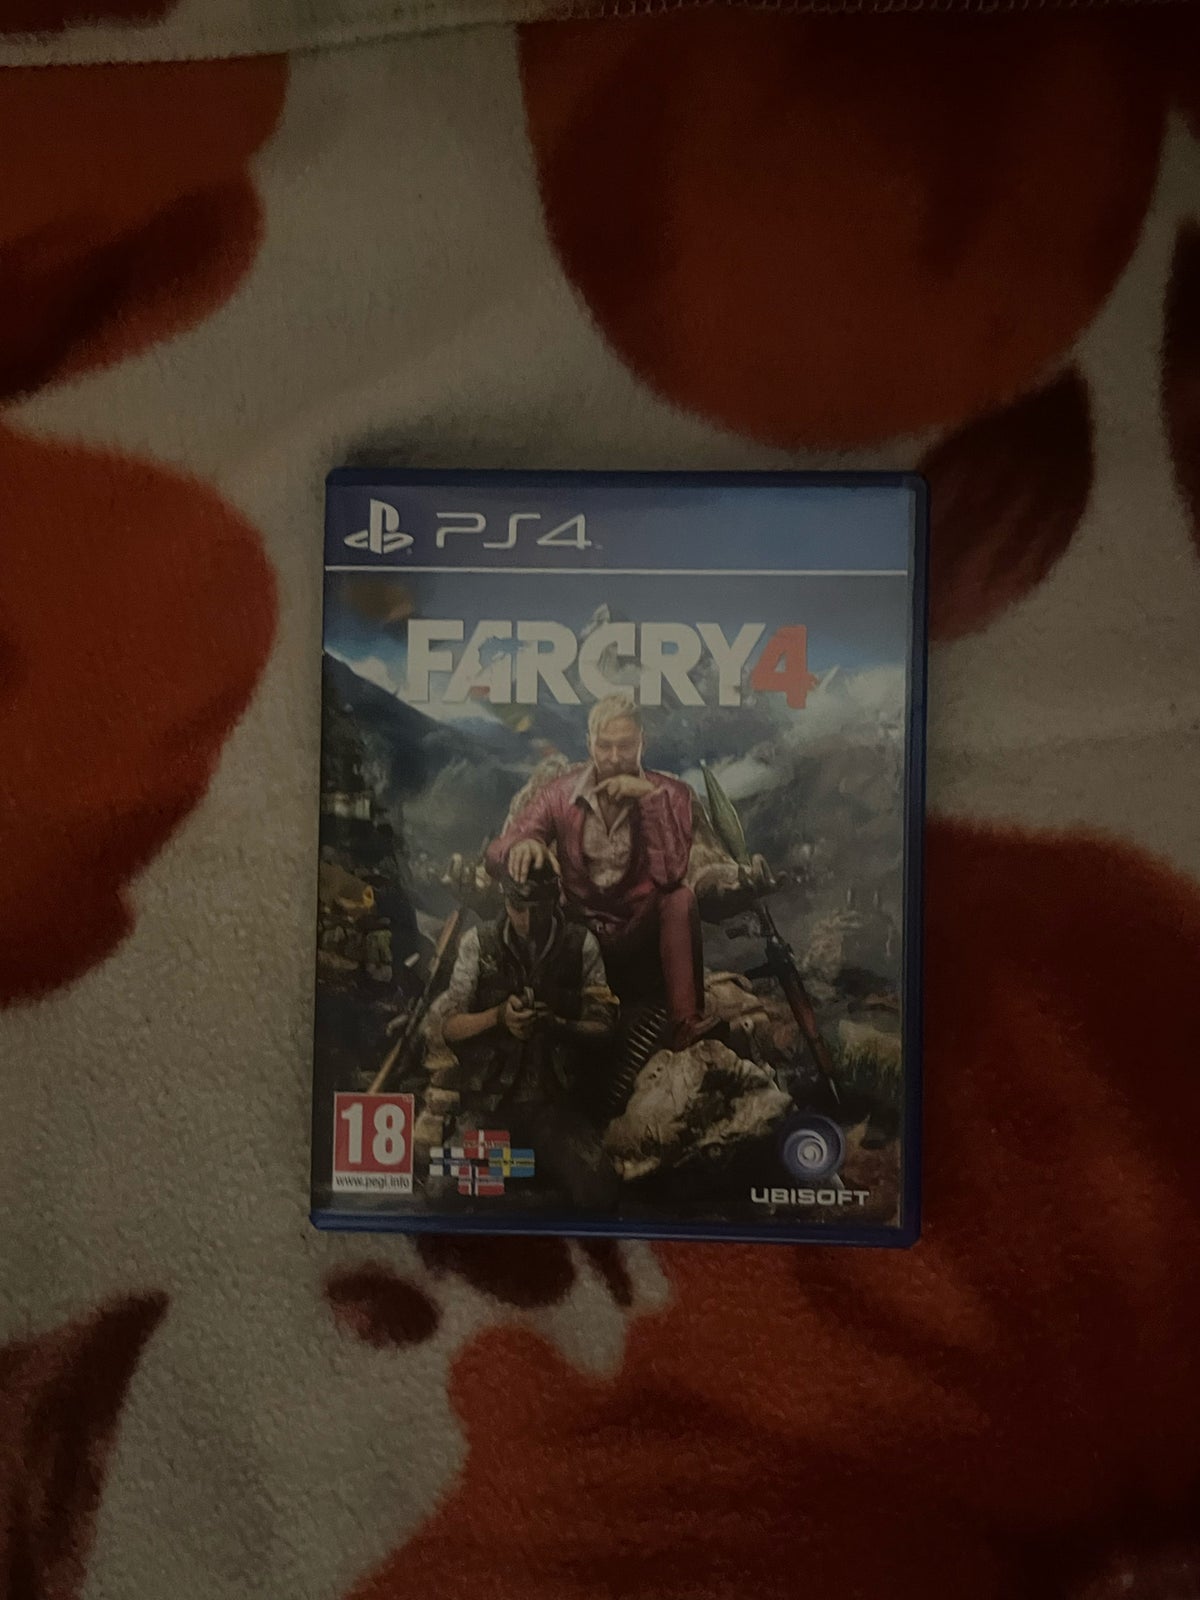 Alle far cry spil , PS4, action